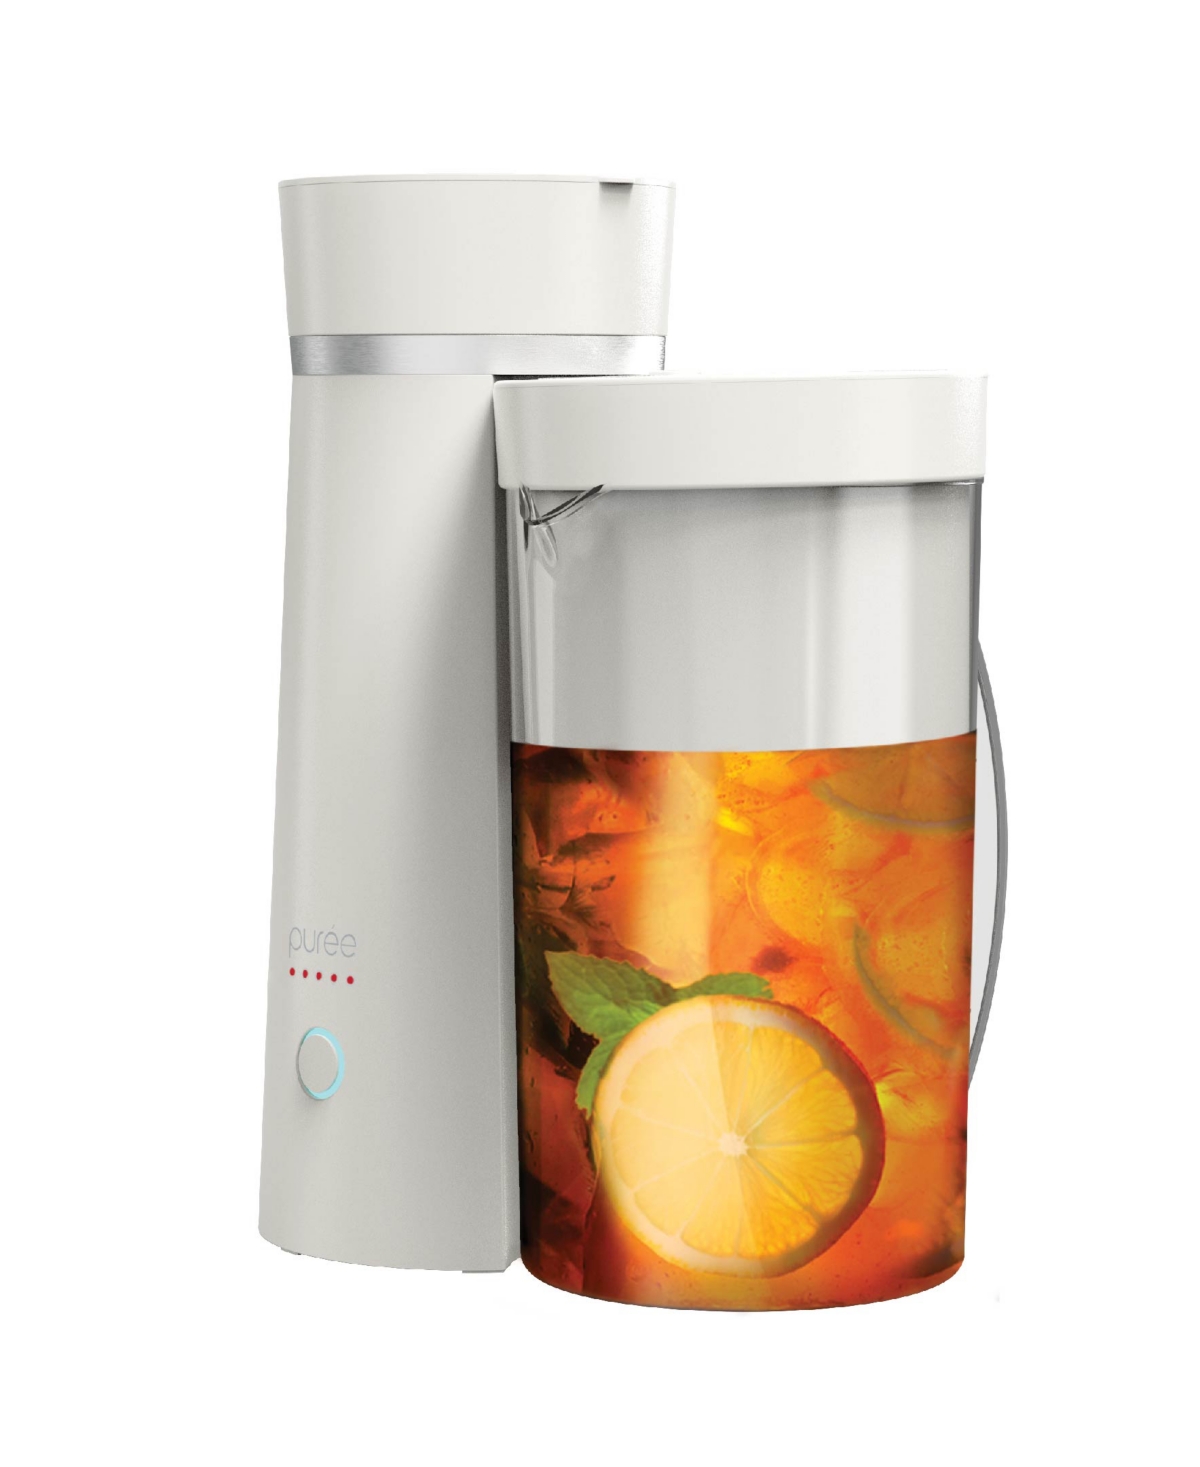 Tzumi Puree Iced Tea And Iced Coffee Maker, 2-quart In White